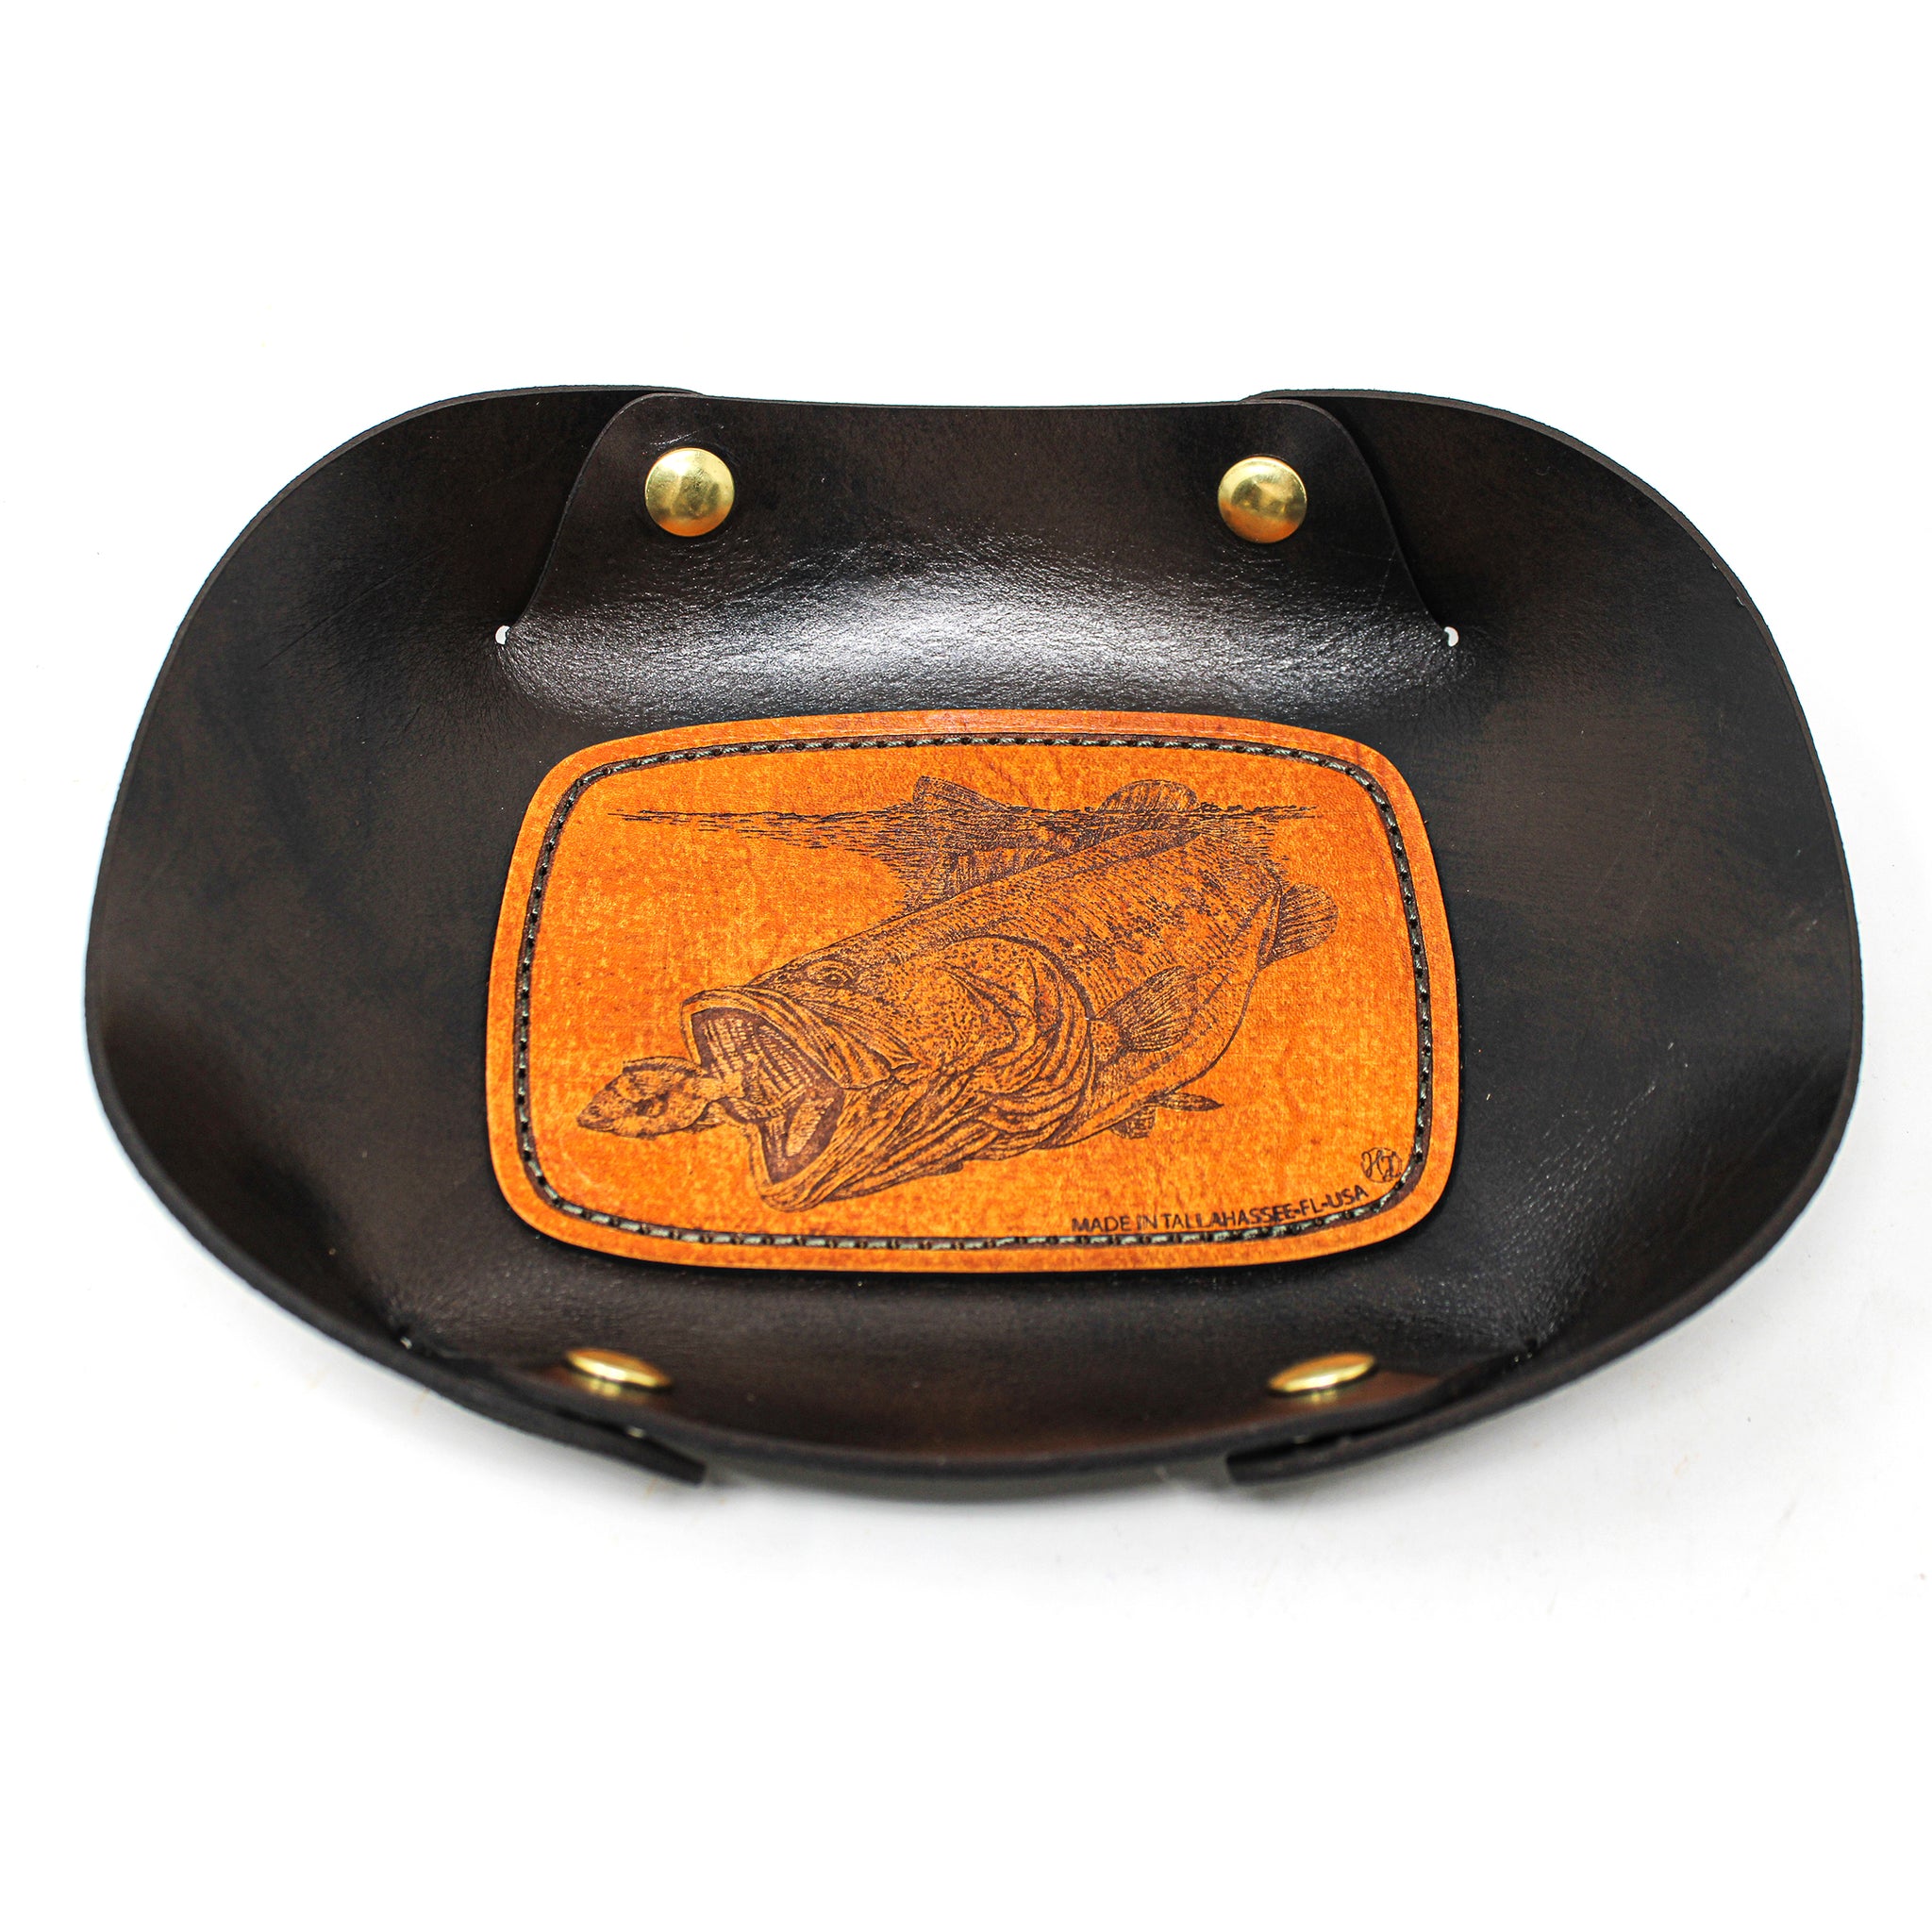 Leather Valet Tray - Large mouth bass - Gulp